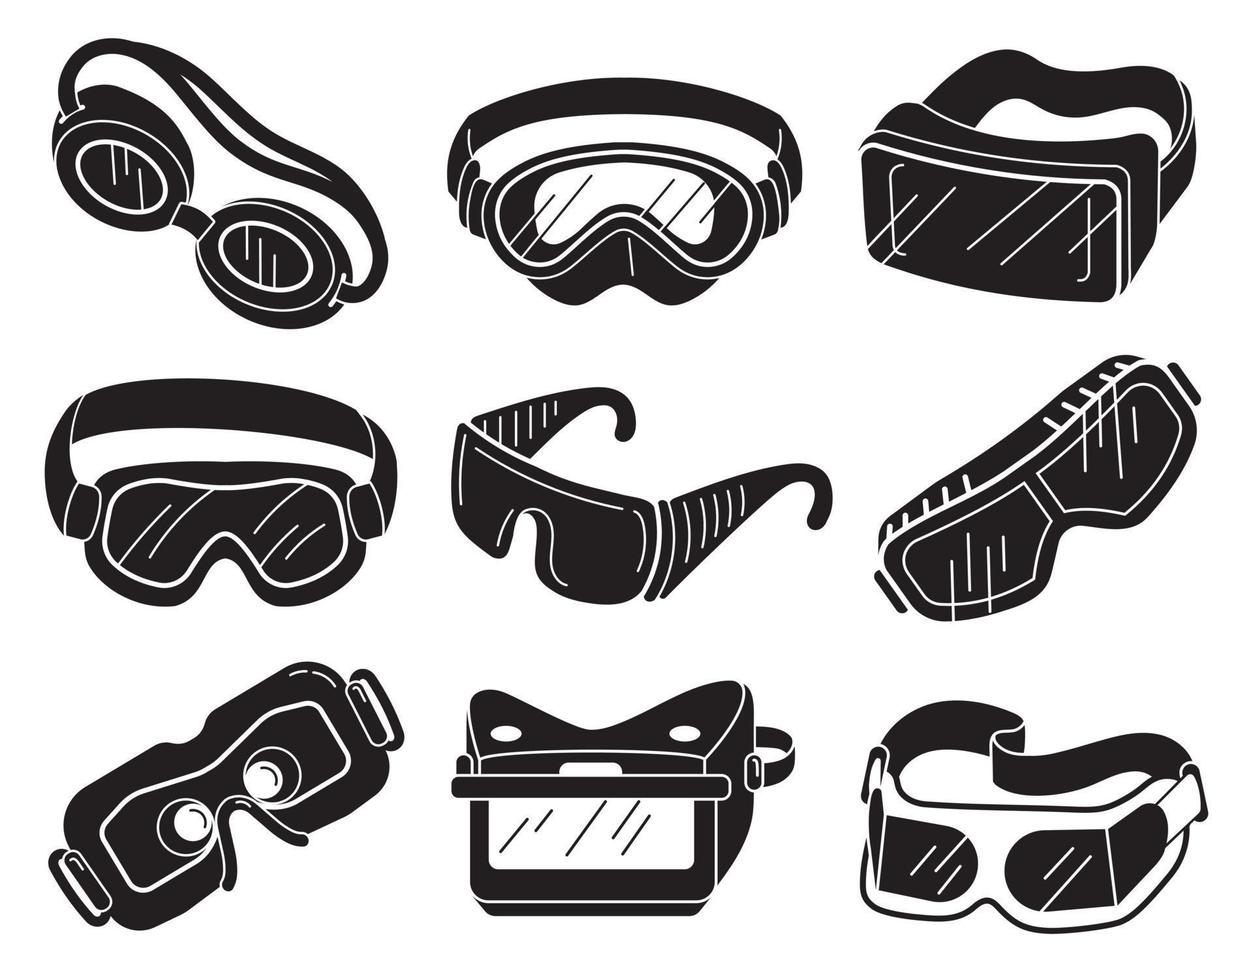 Goggles icons set, simple style vector